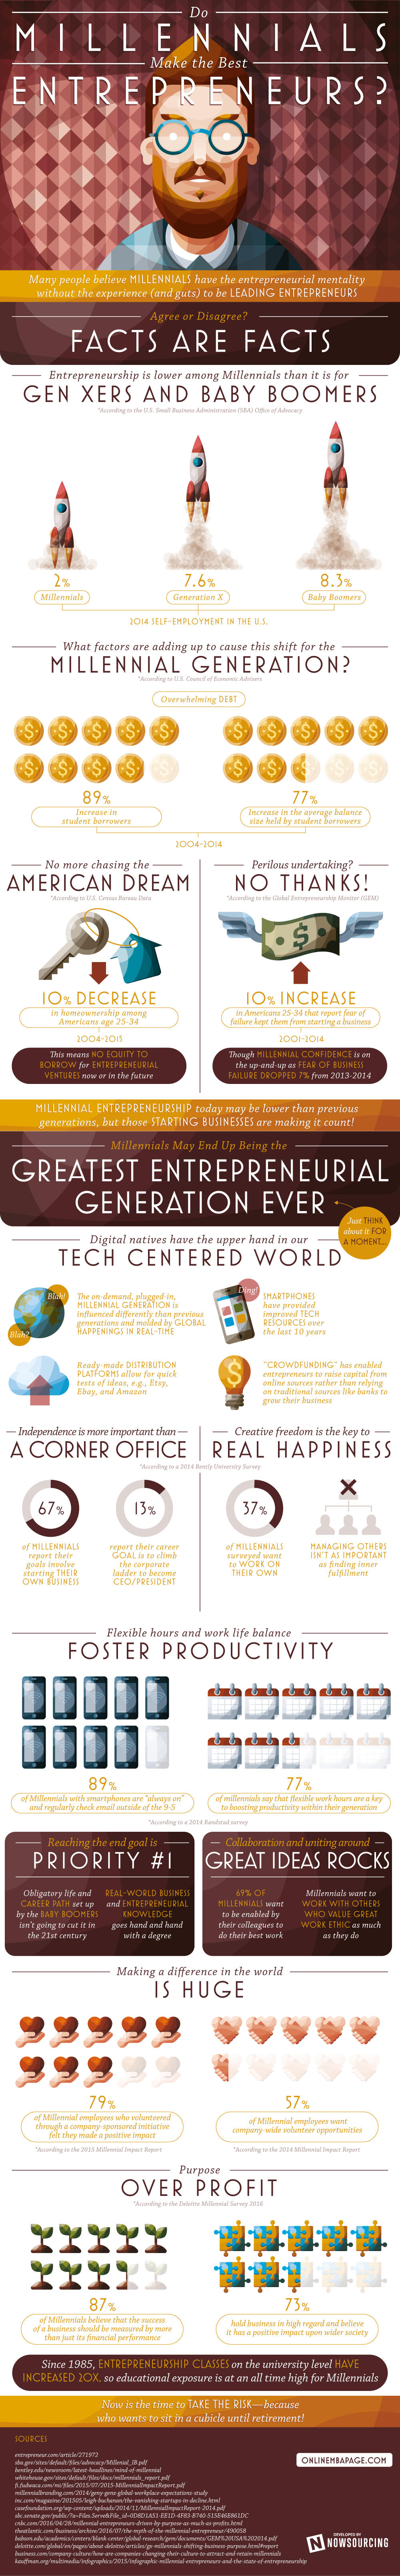 Are Millennials More Entrepreneurial Than Past Generations?